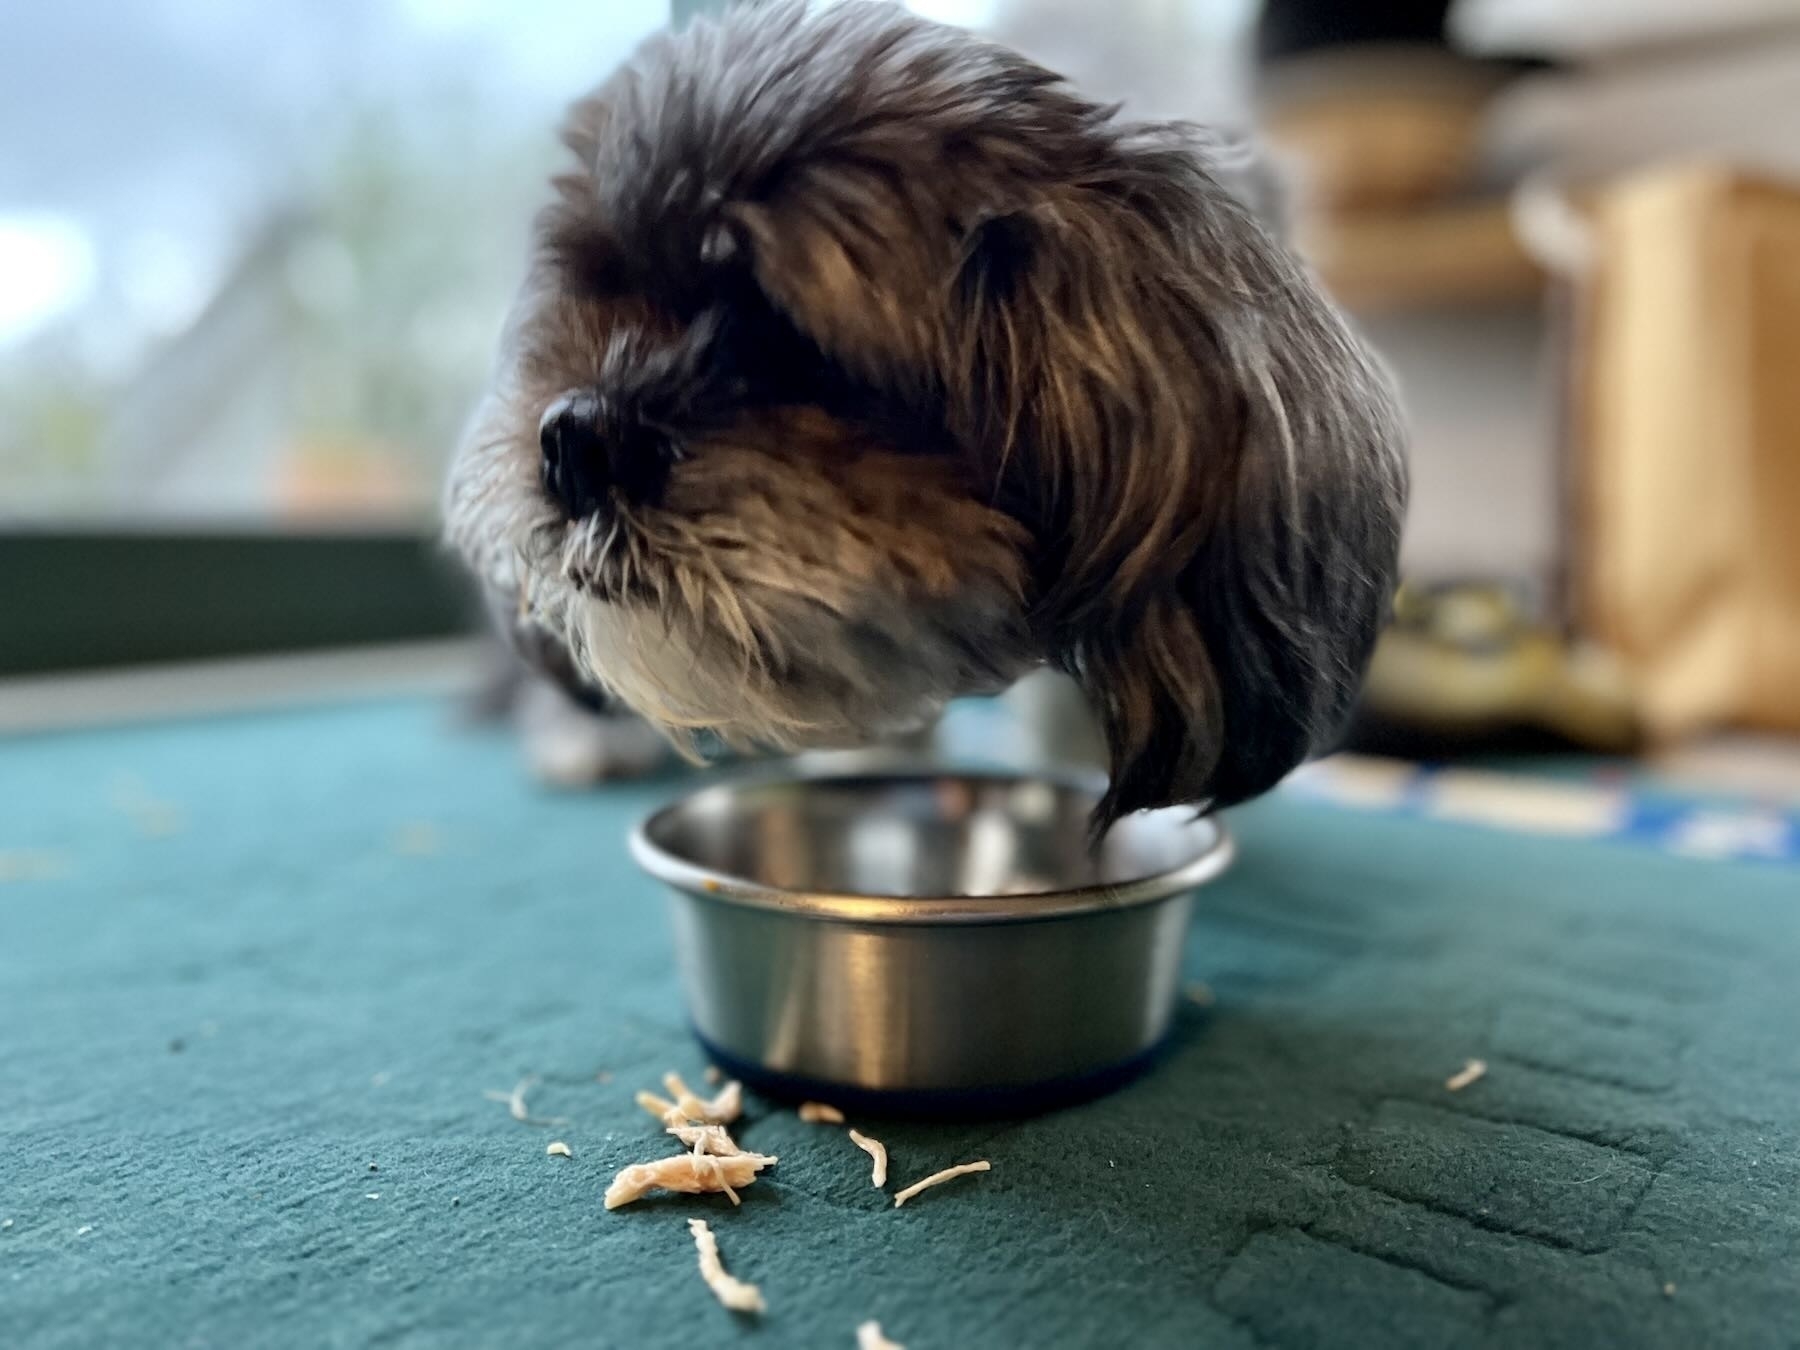 Small dog with head above food bowl and some strands of breakfast on the floor. 